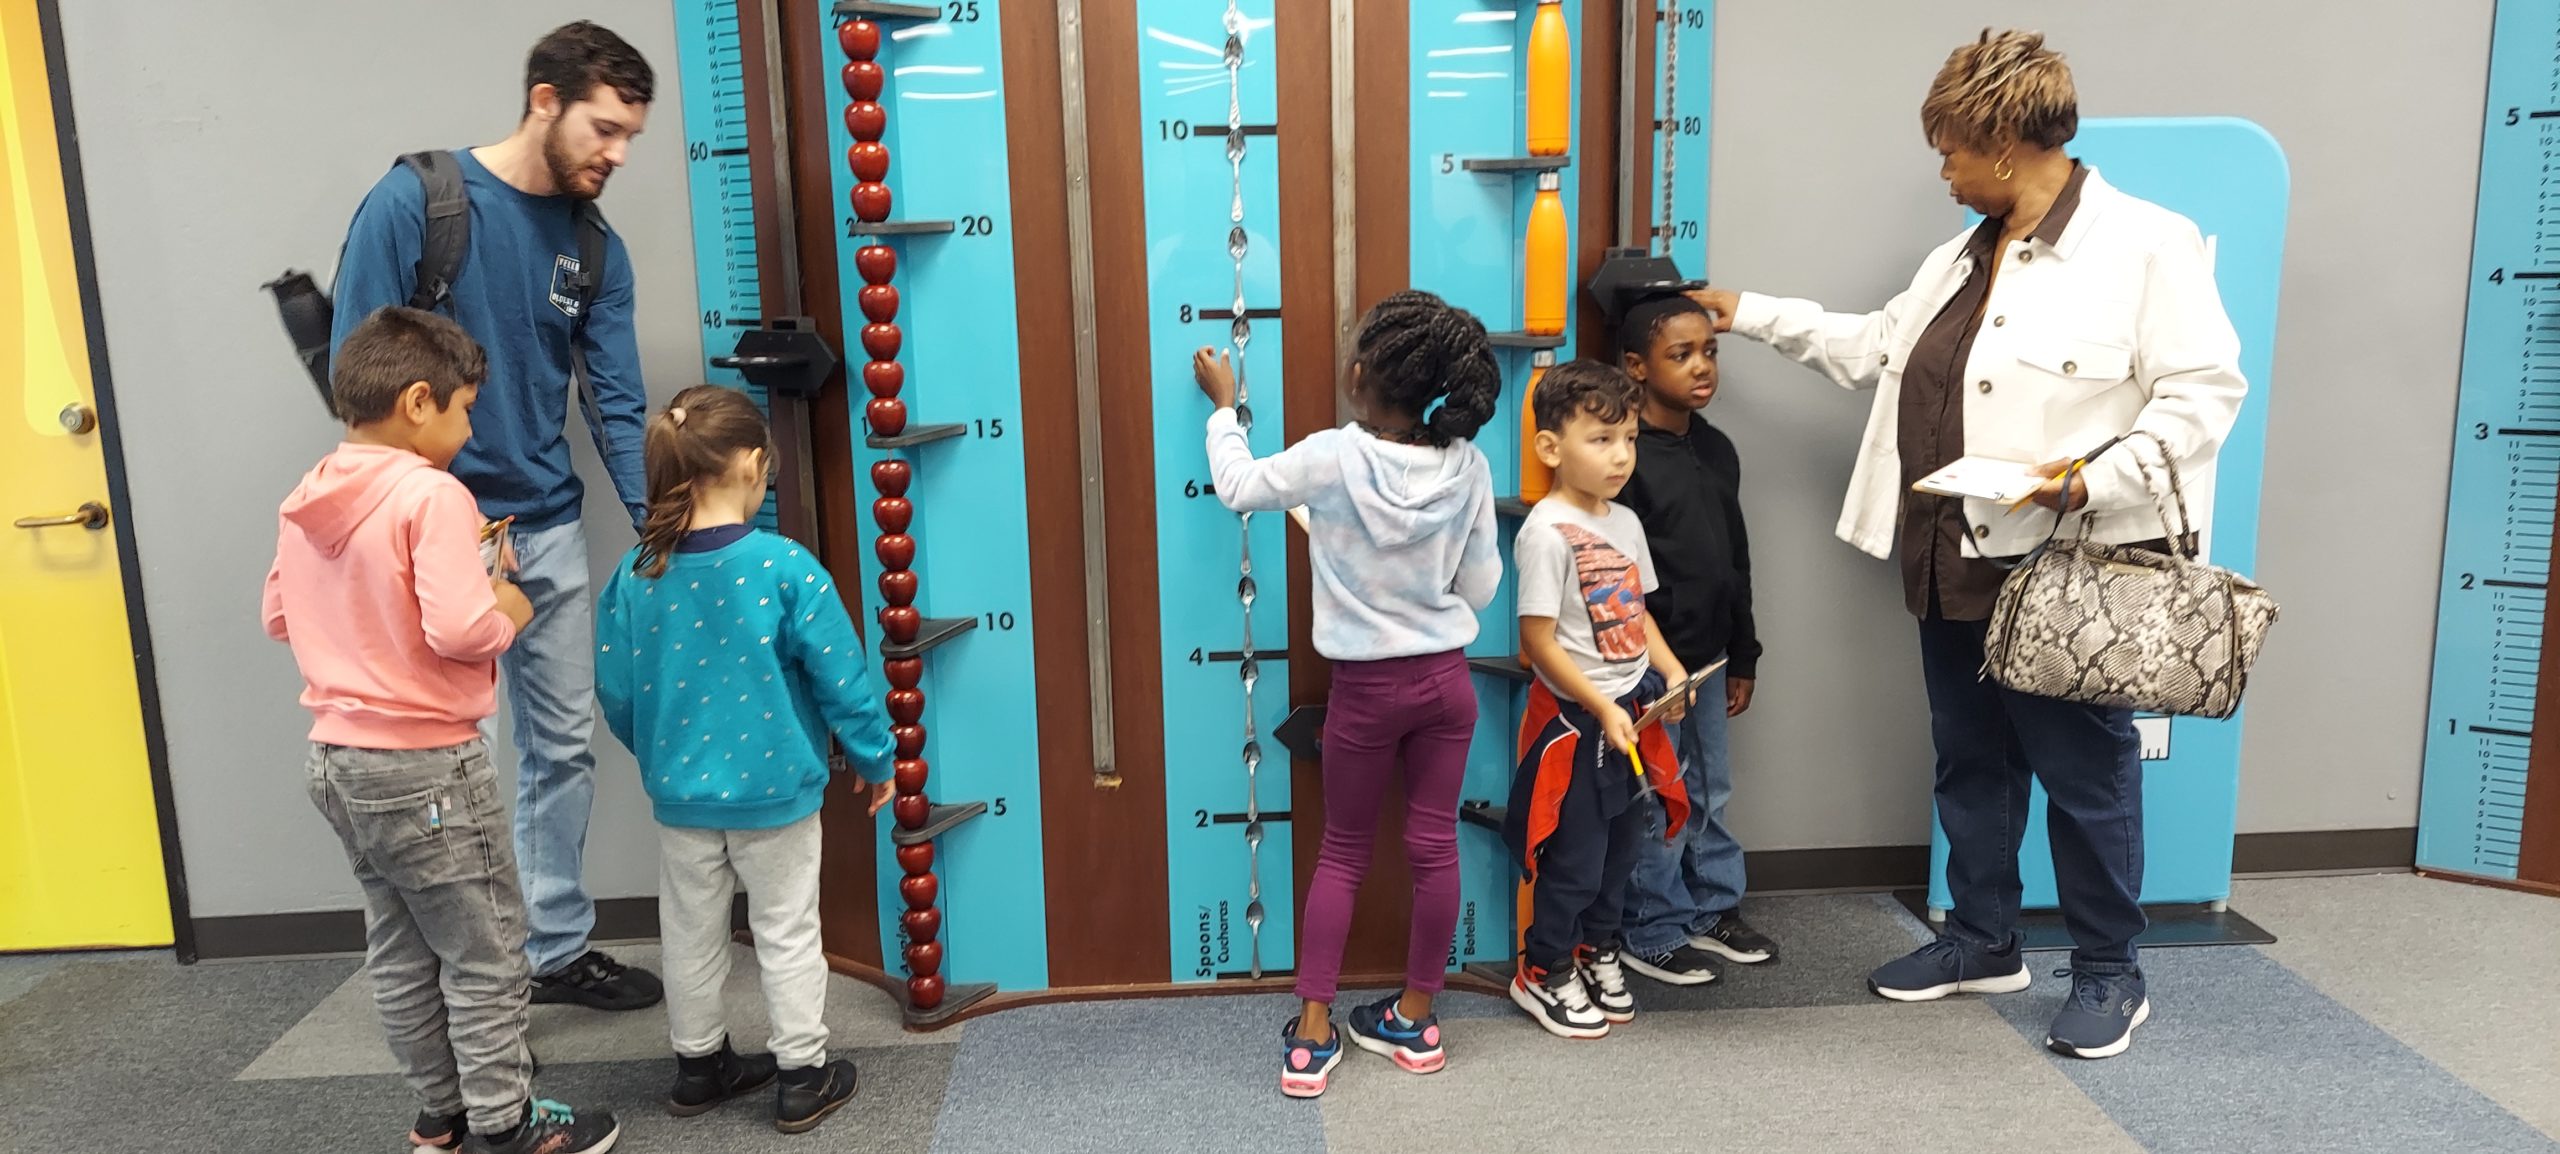 Five children wait for their turn to be measured on a Measurement Rules exhibit piece, helped by two parent chaperones.